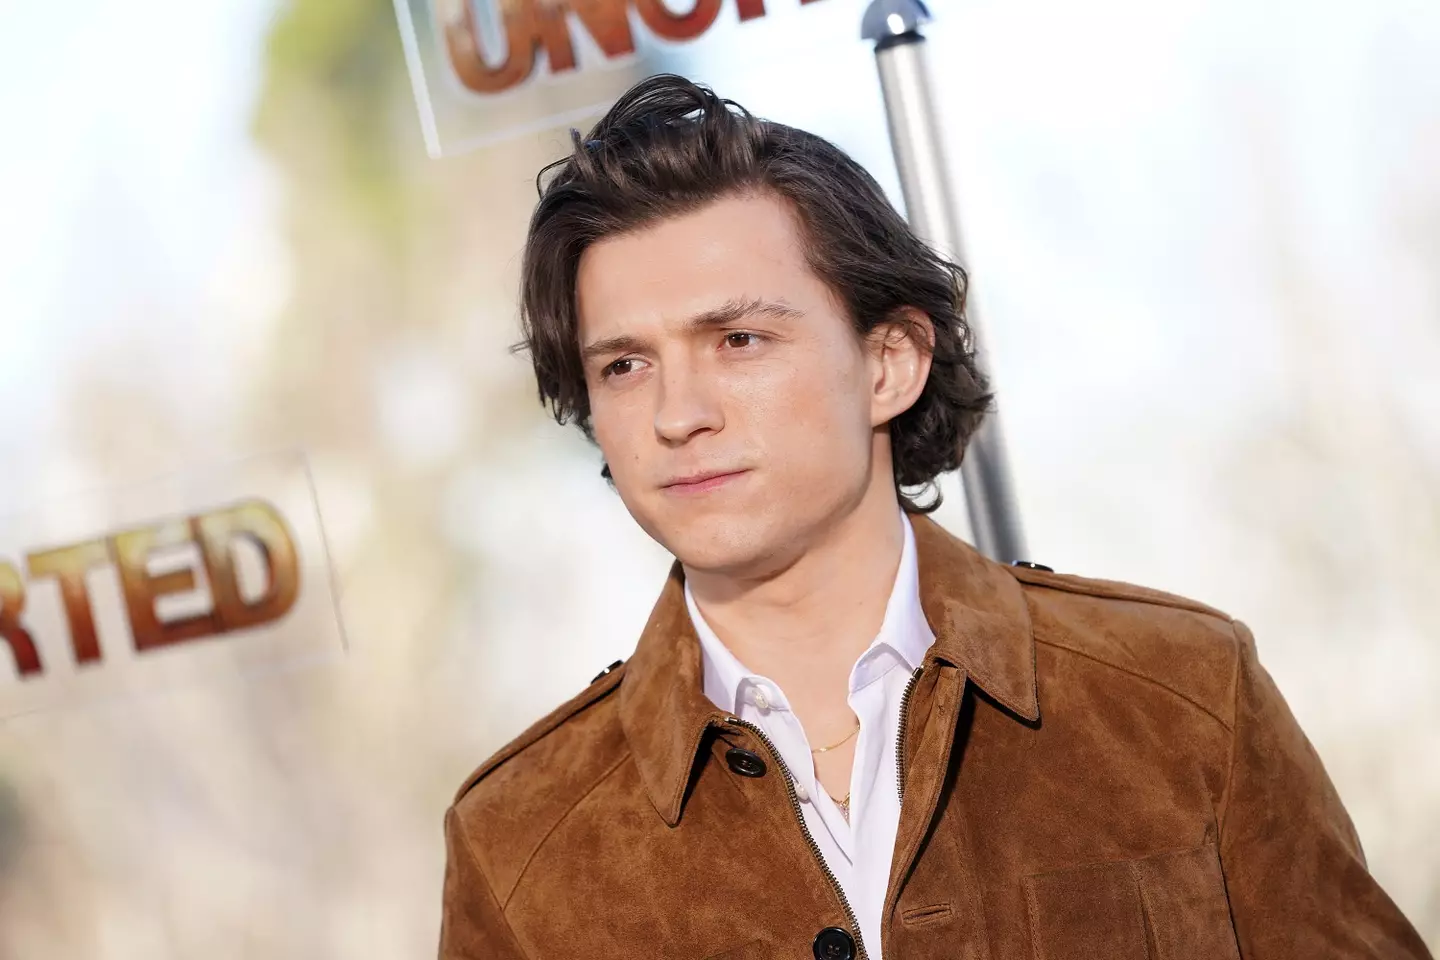 Tom Holland candidly explained why he decided to take a social media break for his mental health.